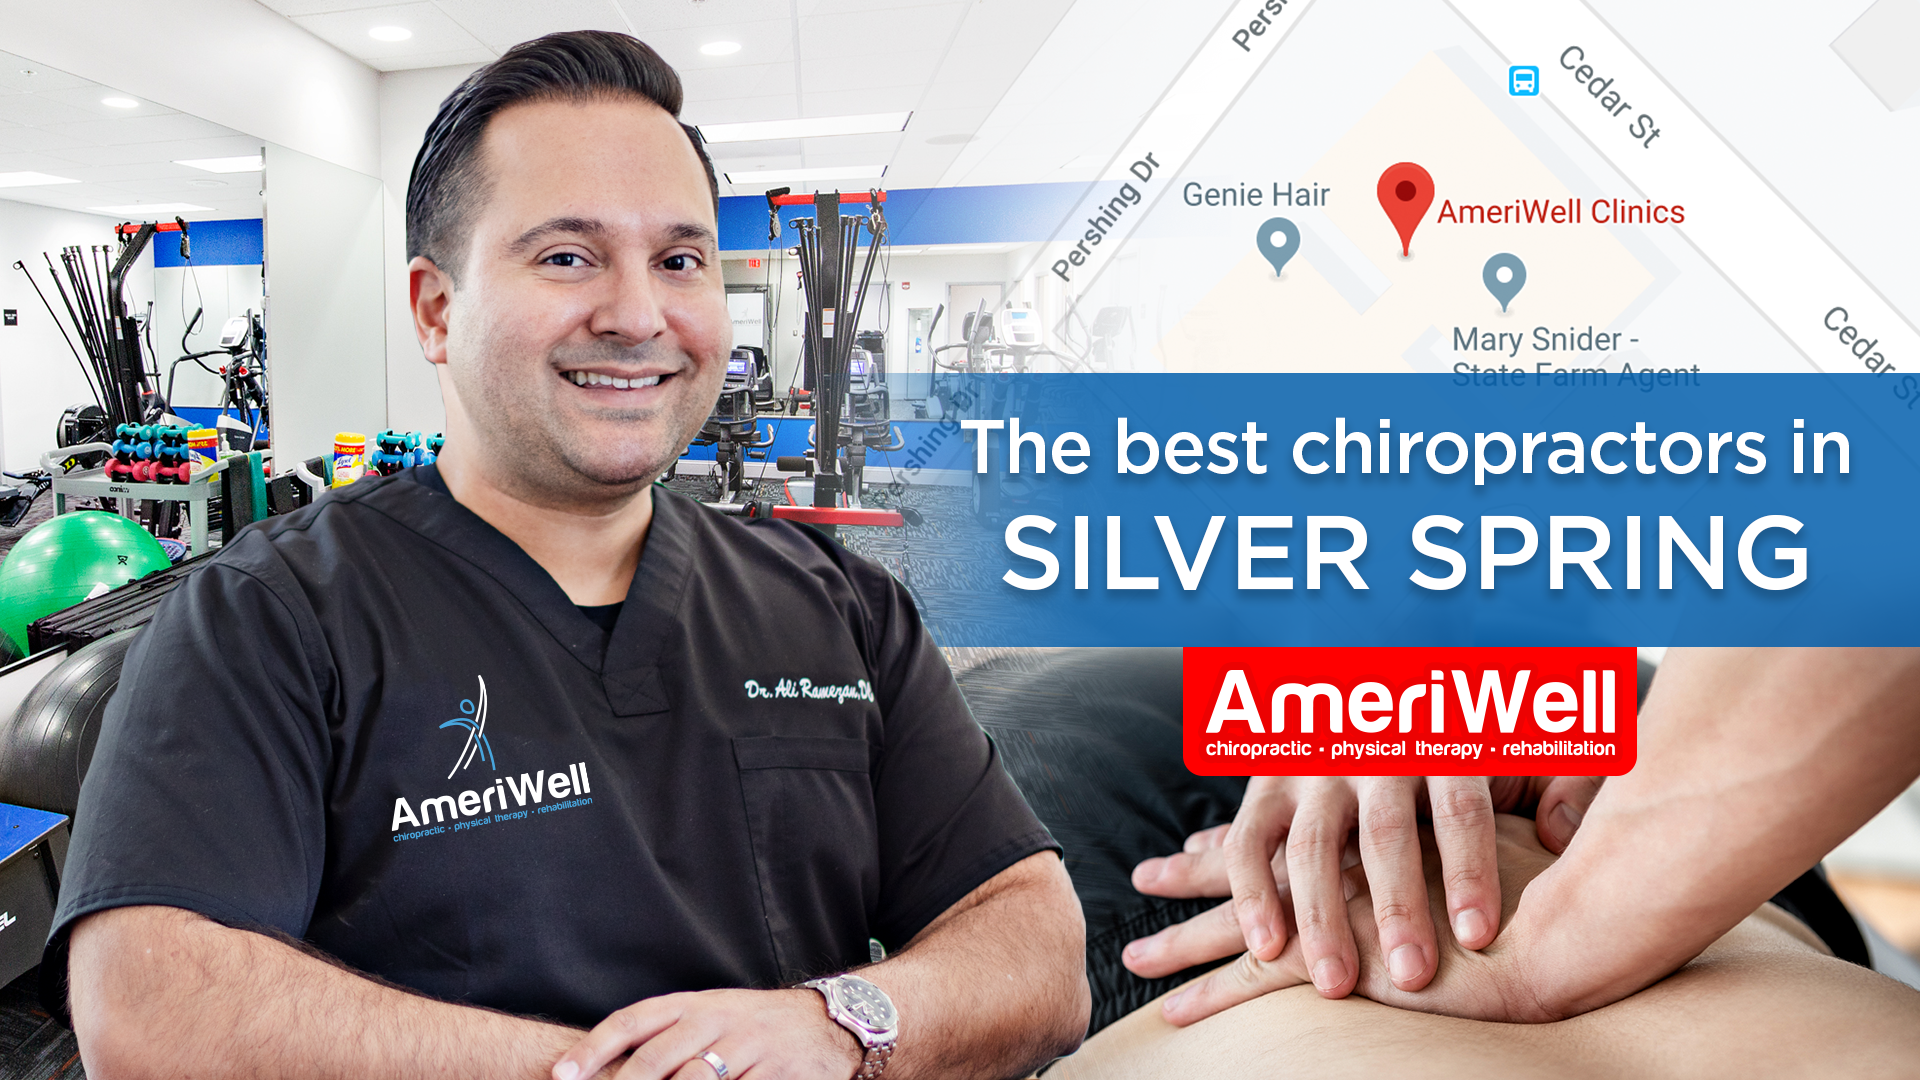 Silver Spring- Ameriwell Clinics the best chiropractors